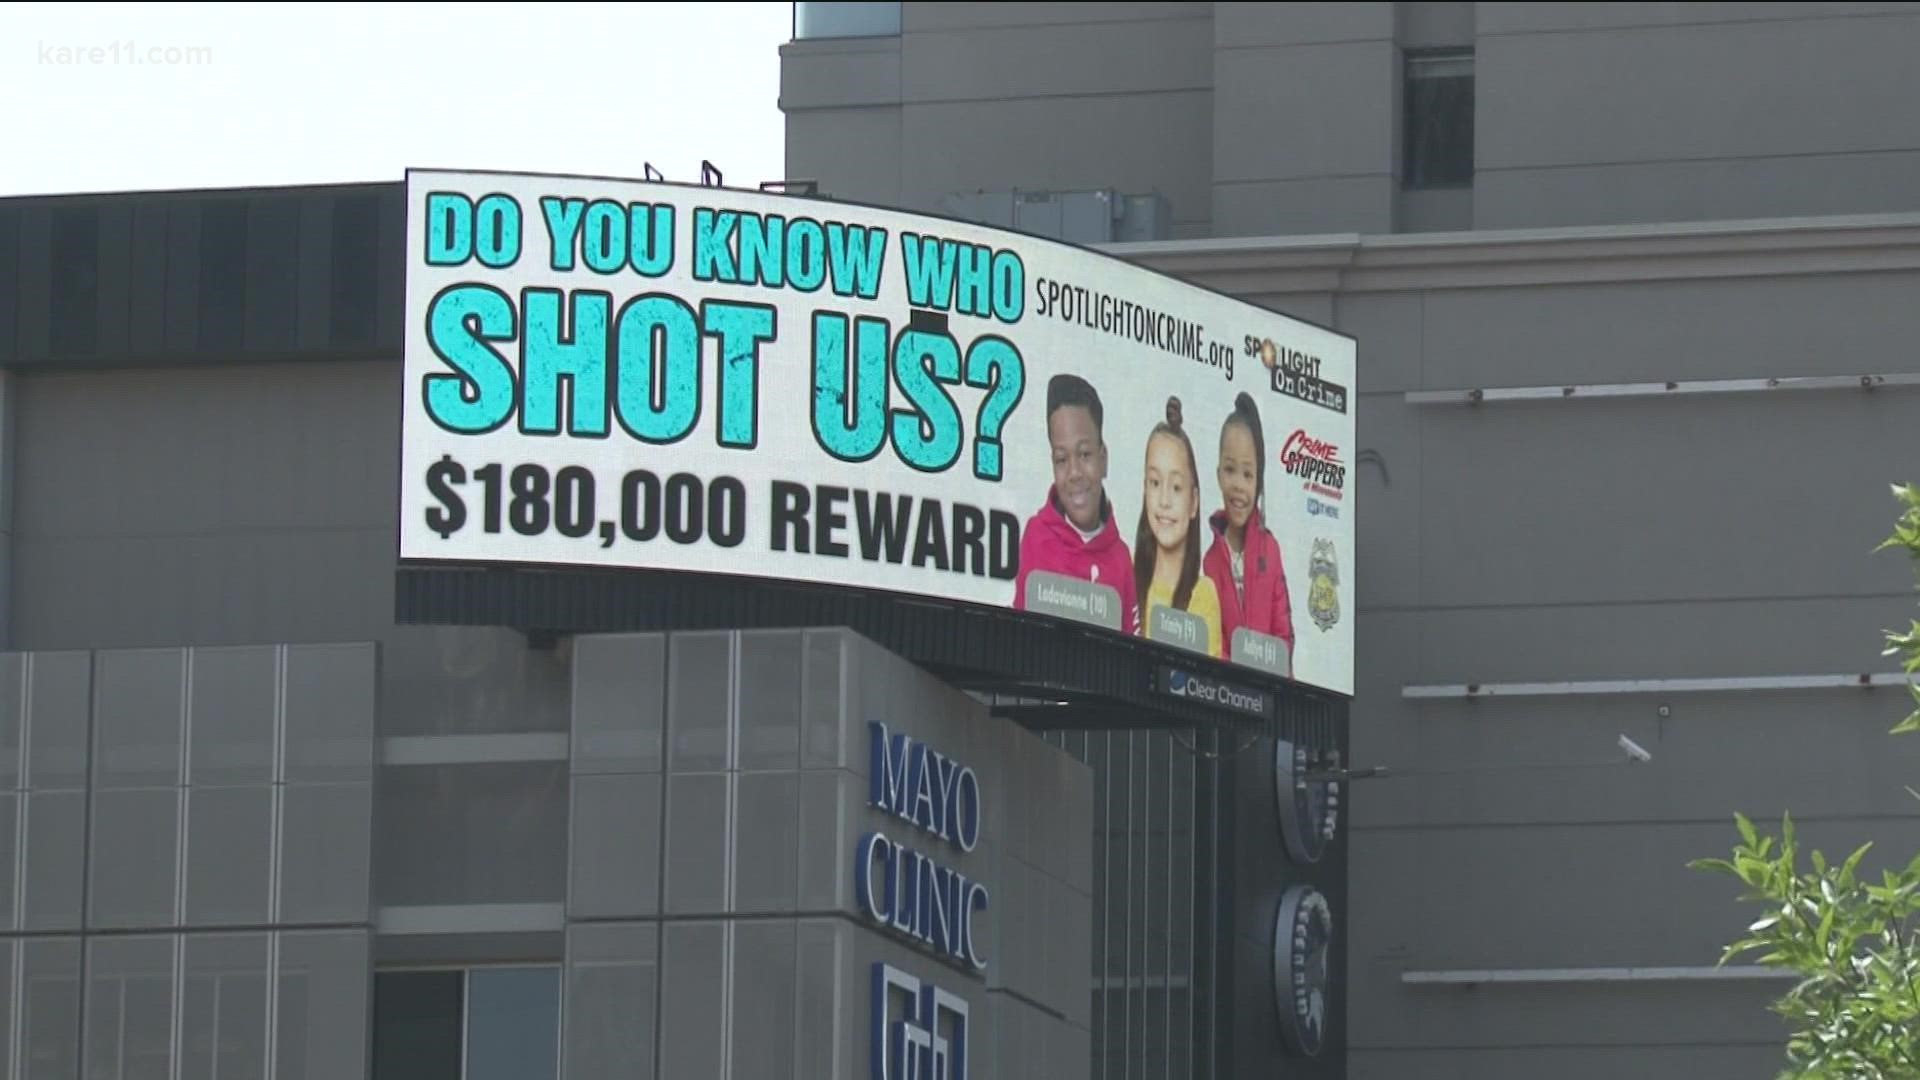 Investigators are still looking for information about three child shootings earlier this year.